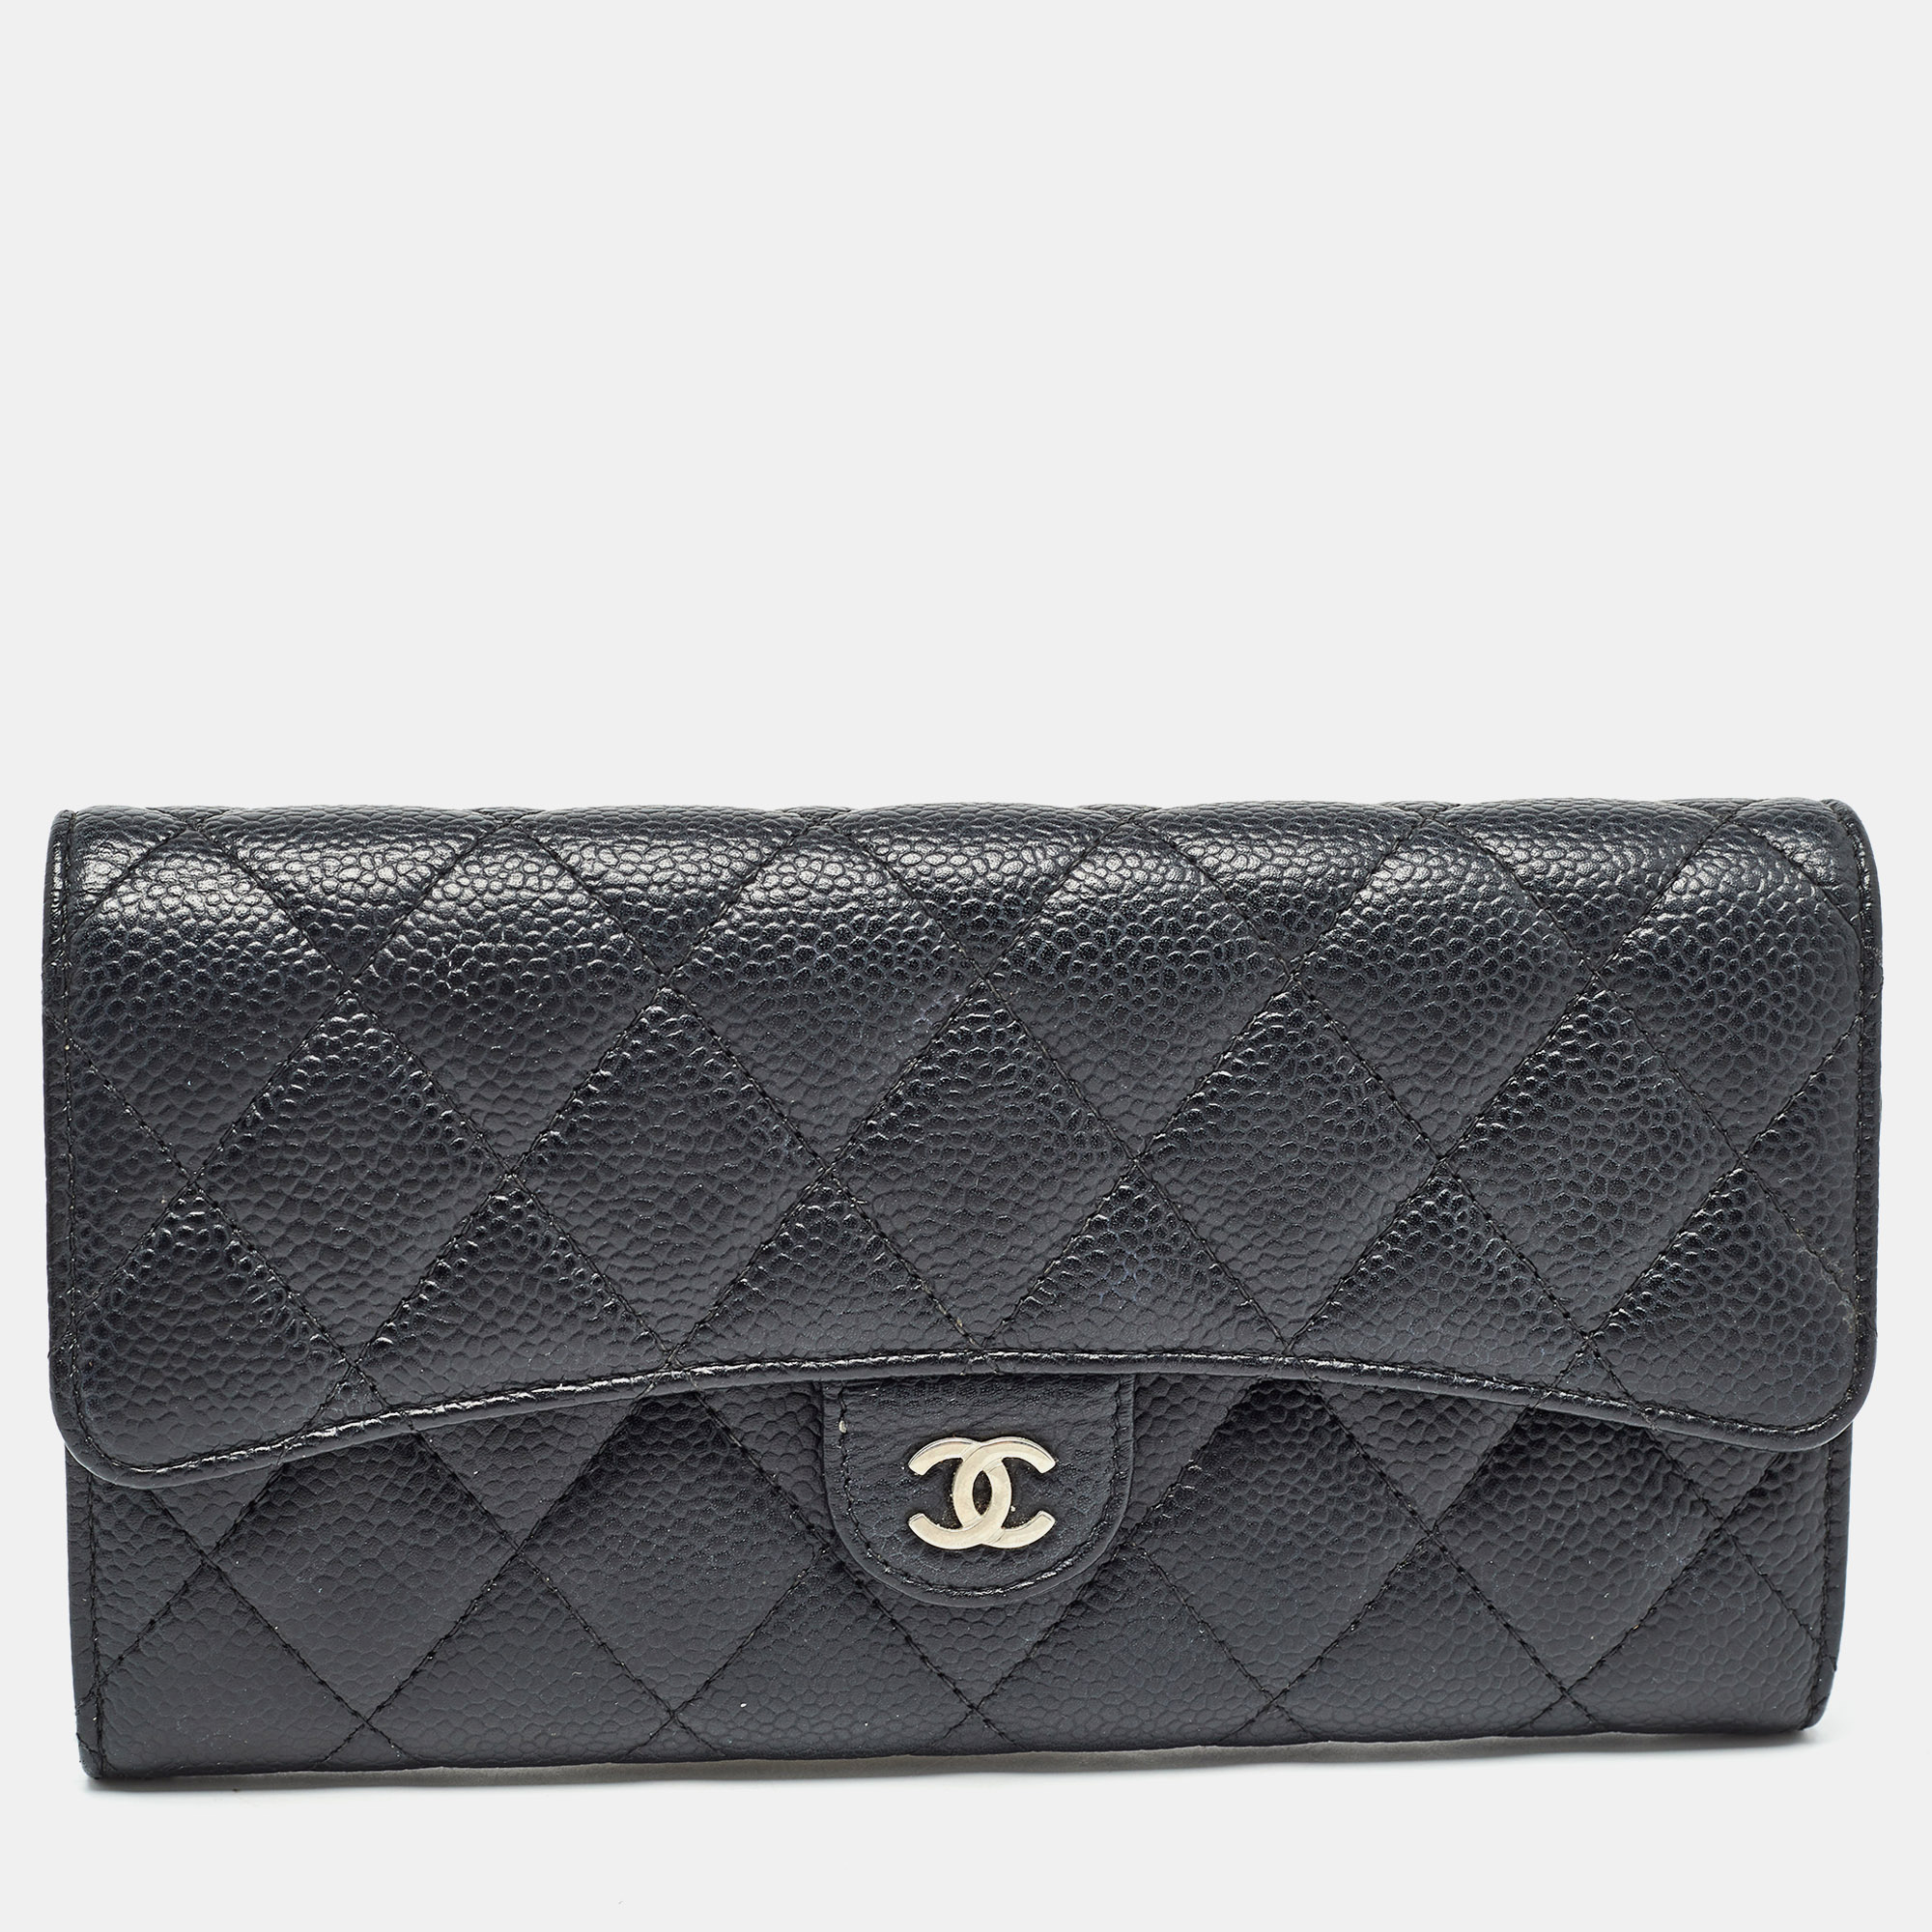 Chanel black caviar quilted leather classic l flap wallet